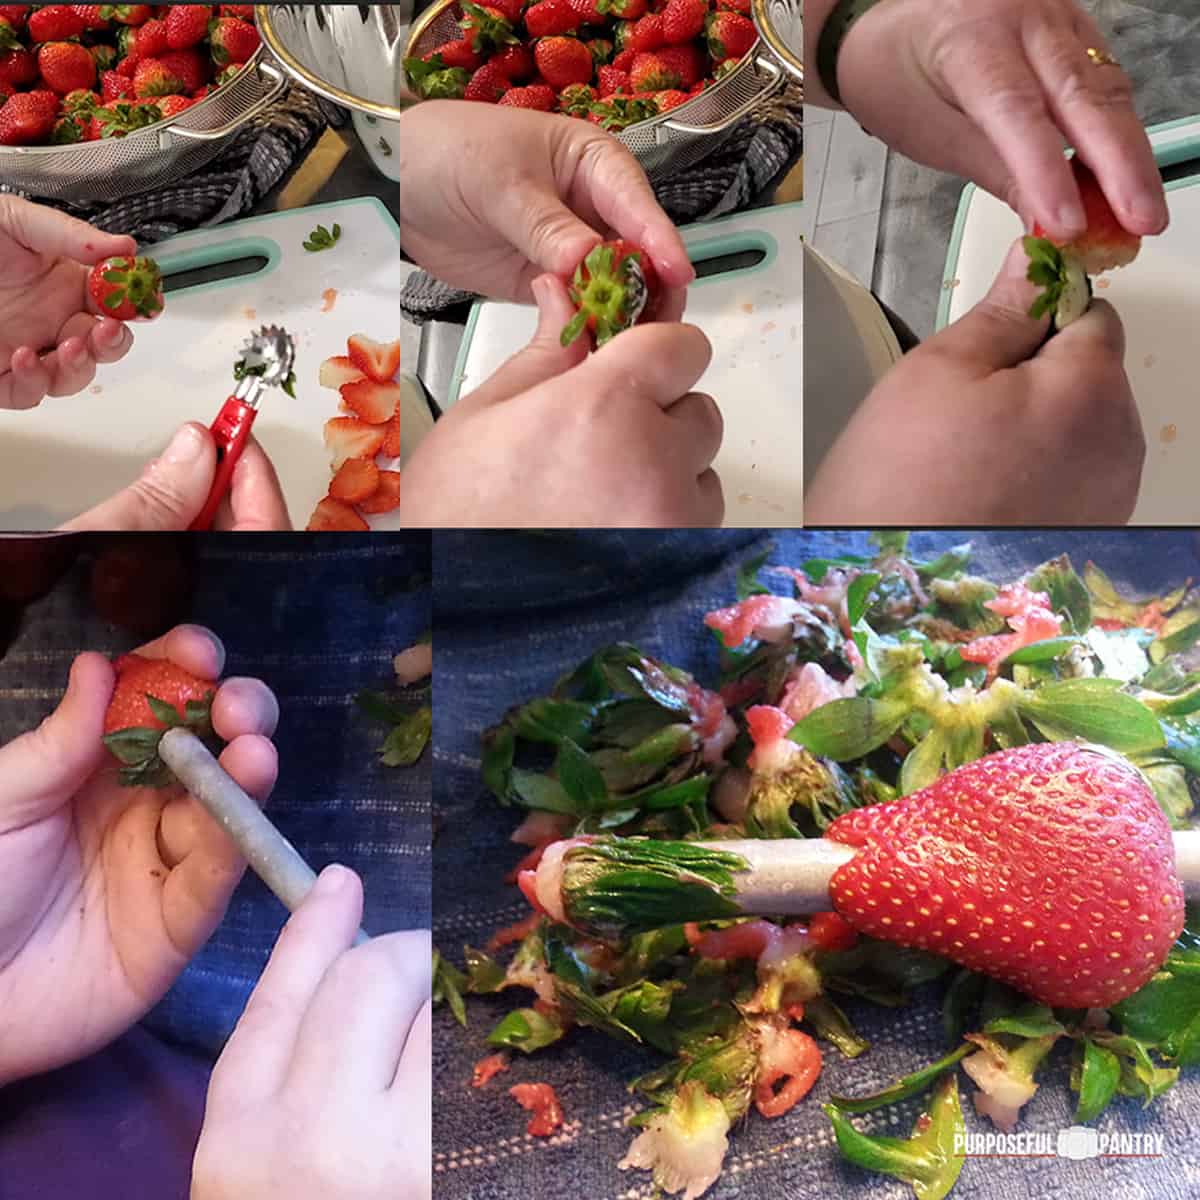 Hulling strawberries using the hulling tool method and the straw method.